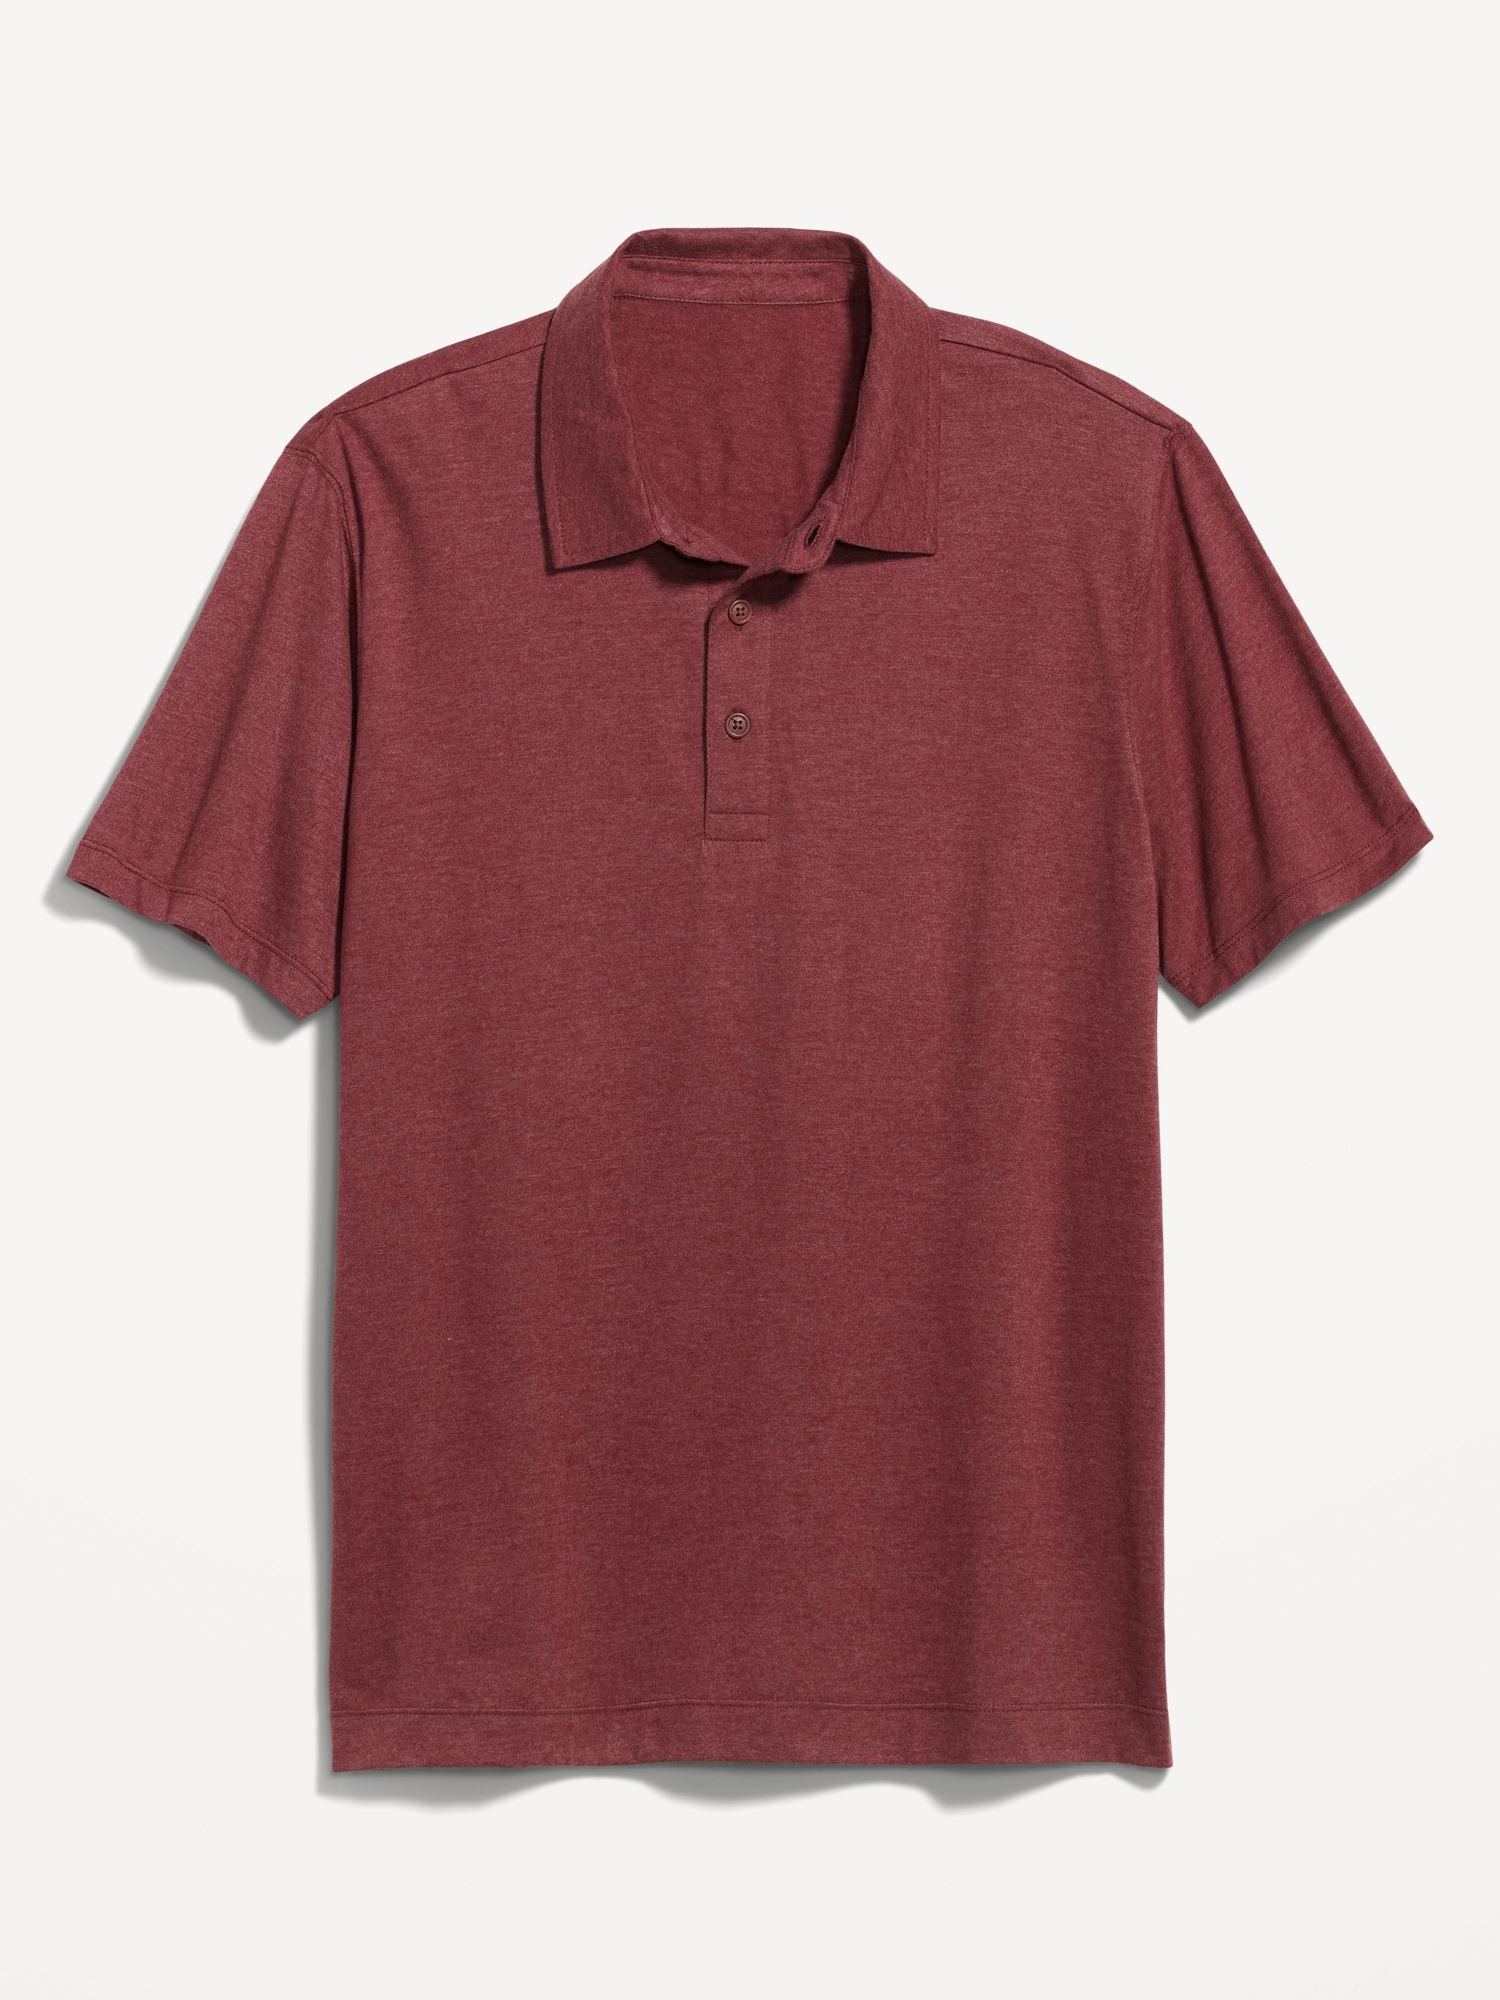 Classic Fit Jersey Polo for Men | Old Navy